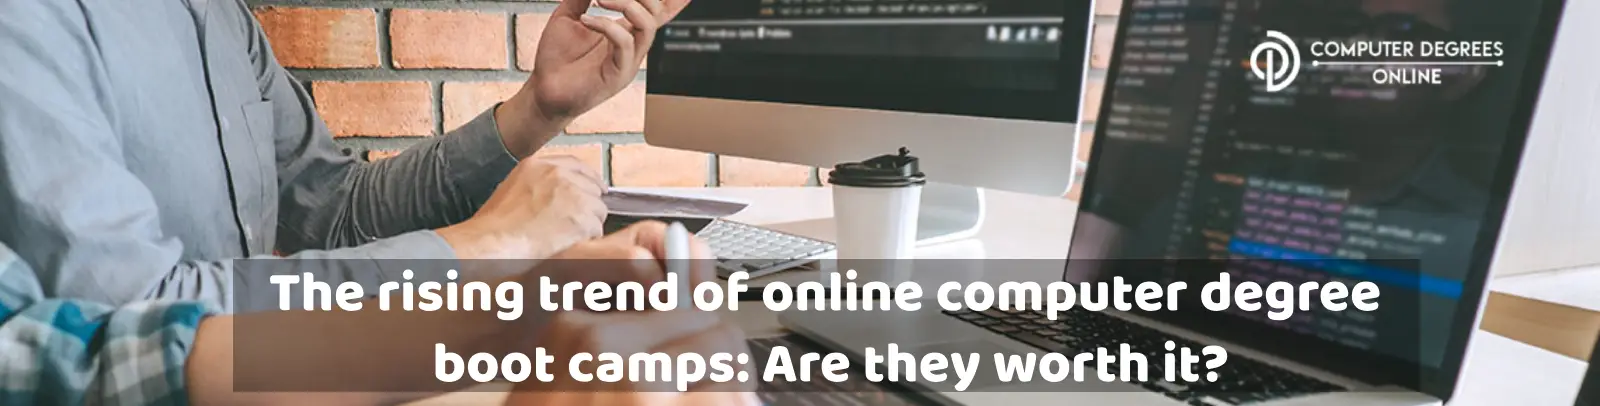 The rising trend of online computer degree boot camps: Are they worth it?